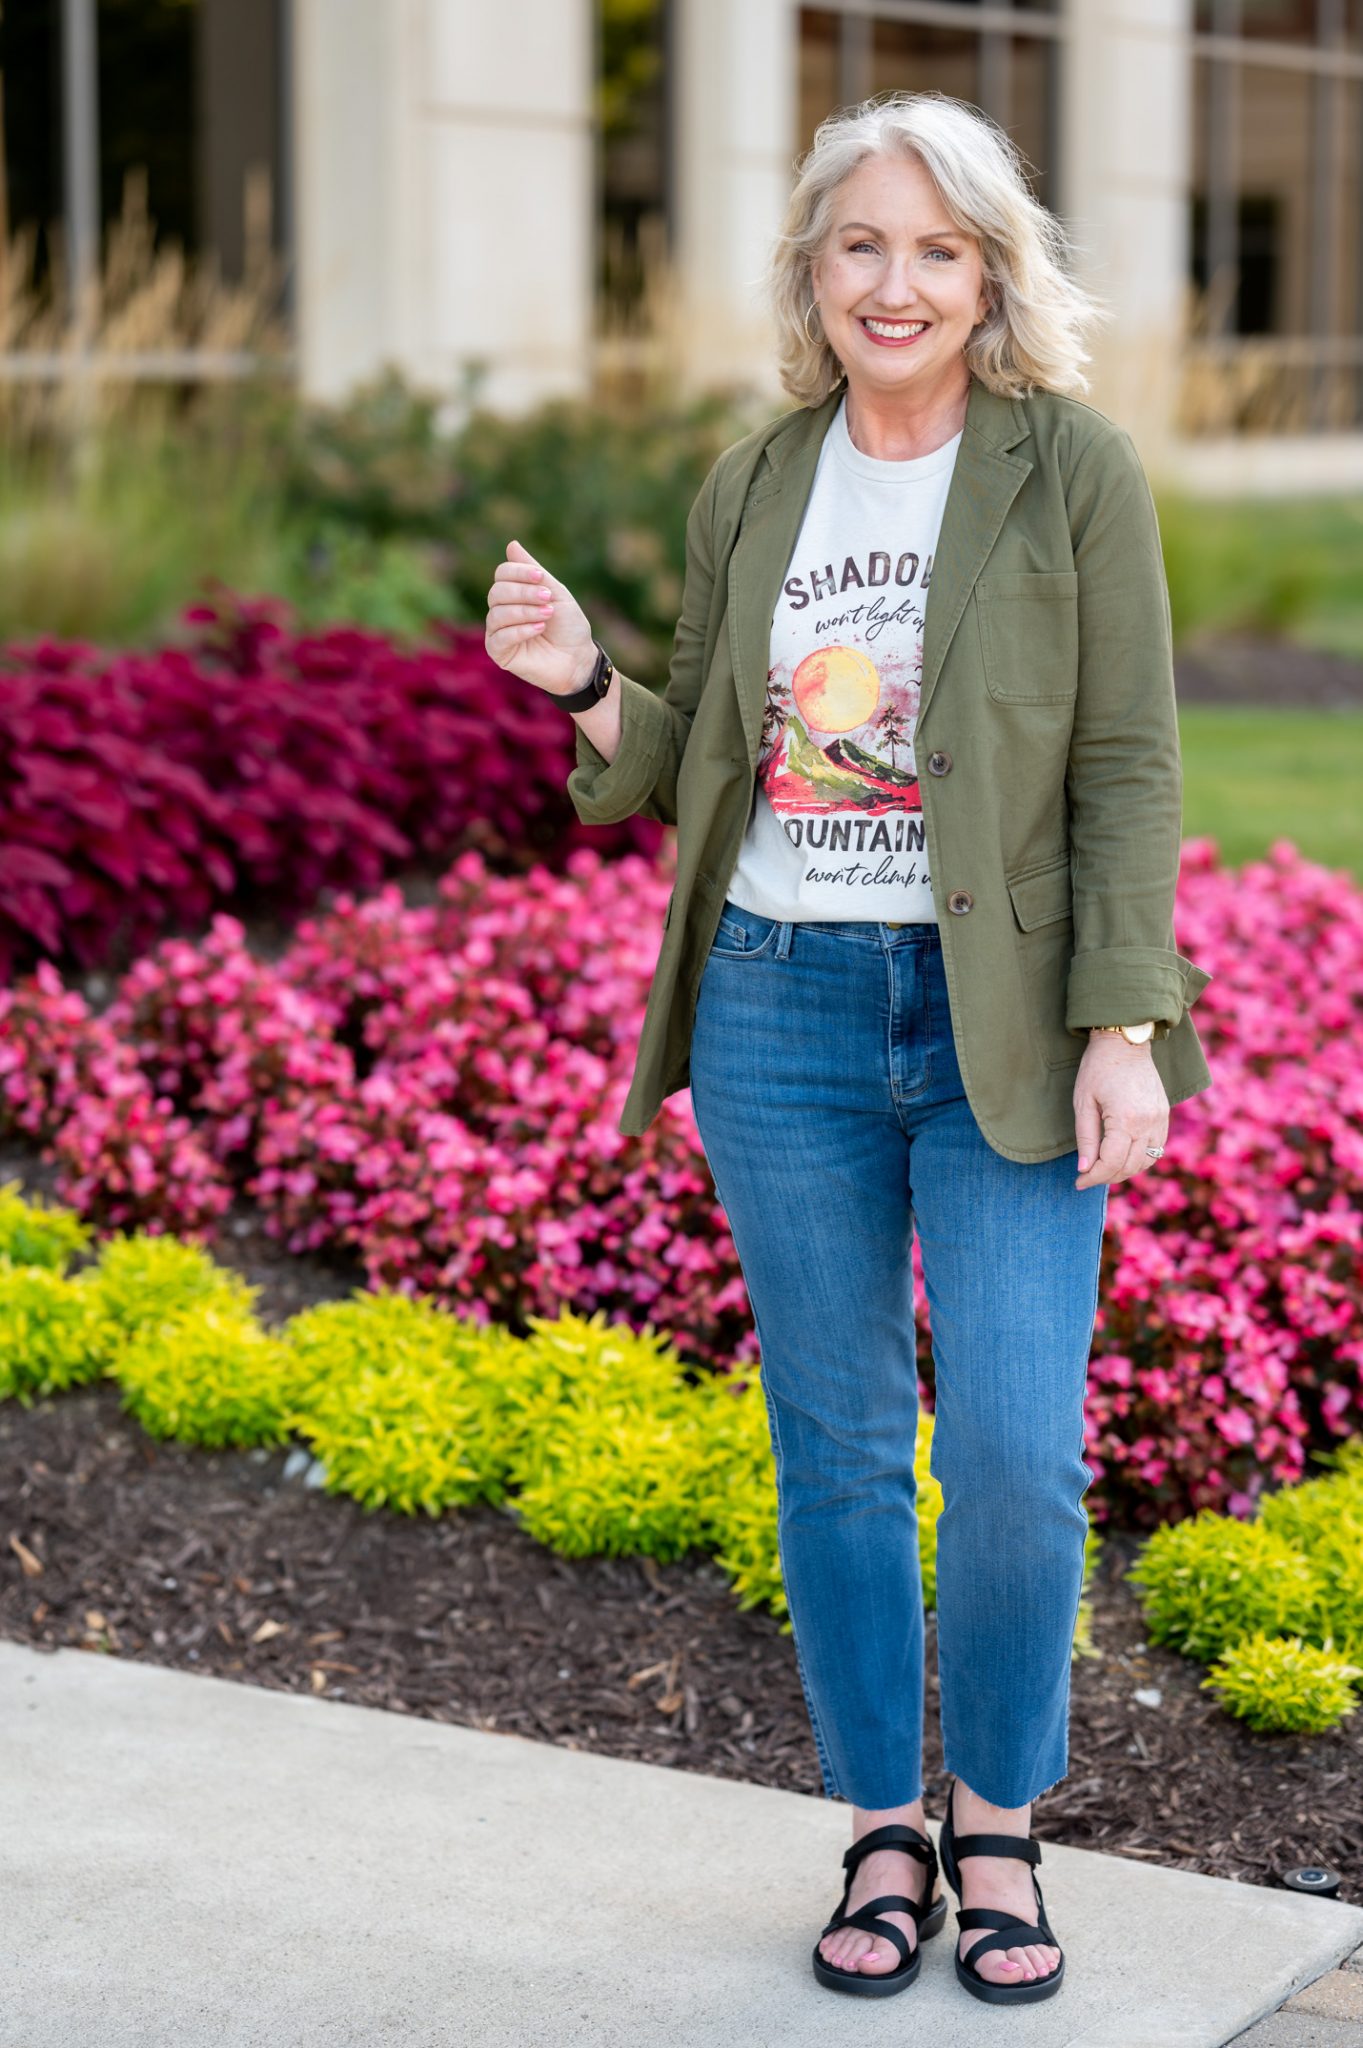 My Fall Blue Jeans Lookbook for Women Over 50 - Dressed for My Day